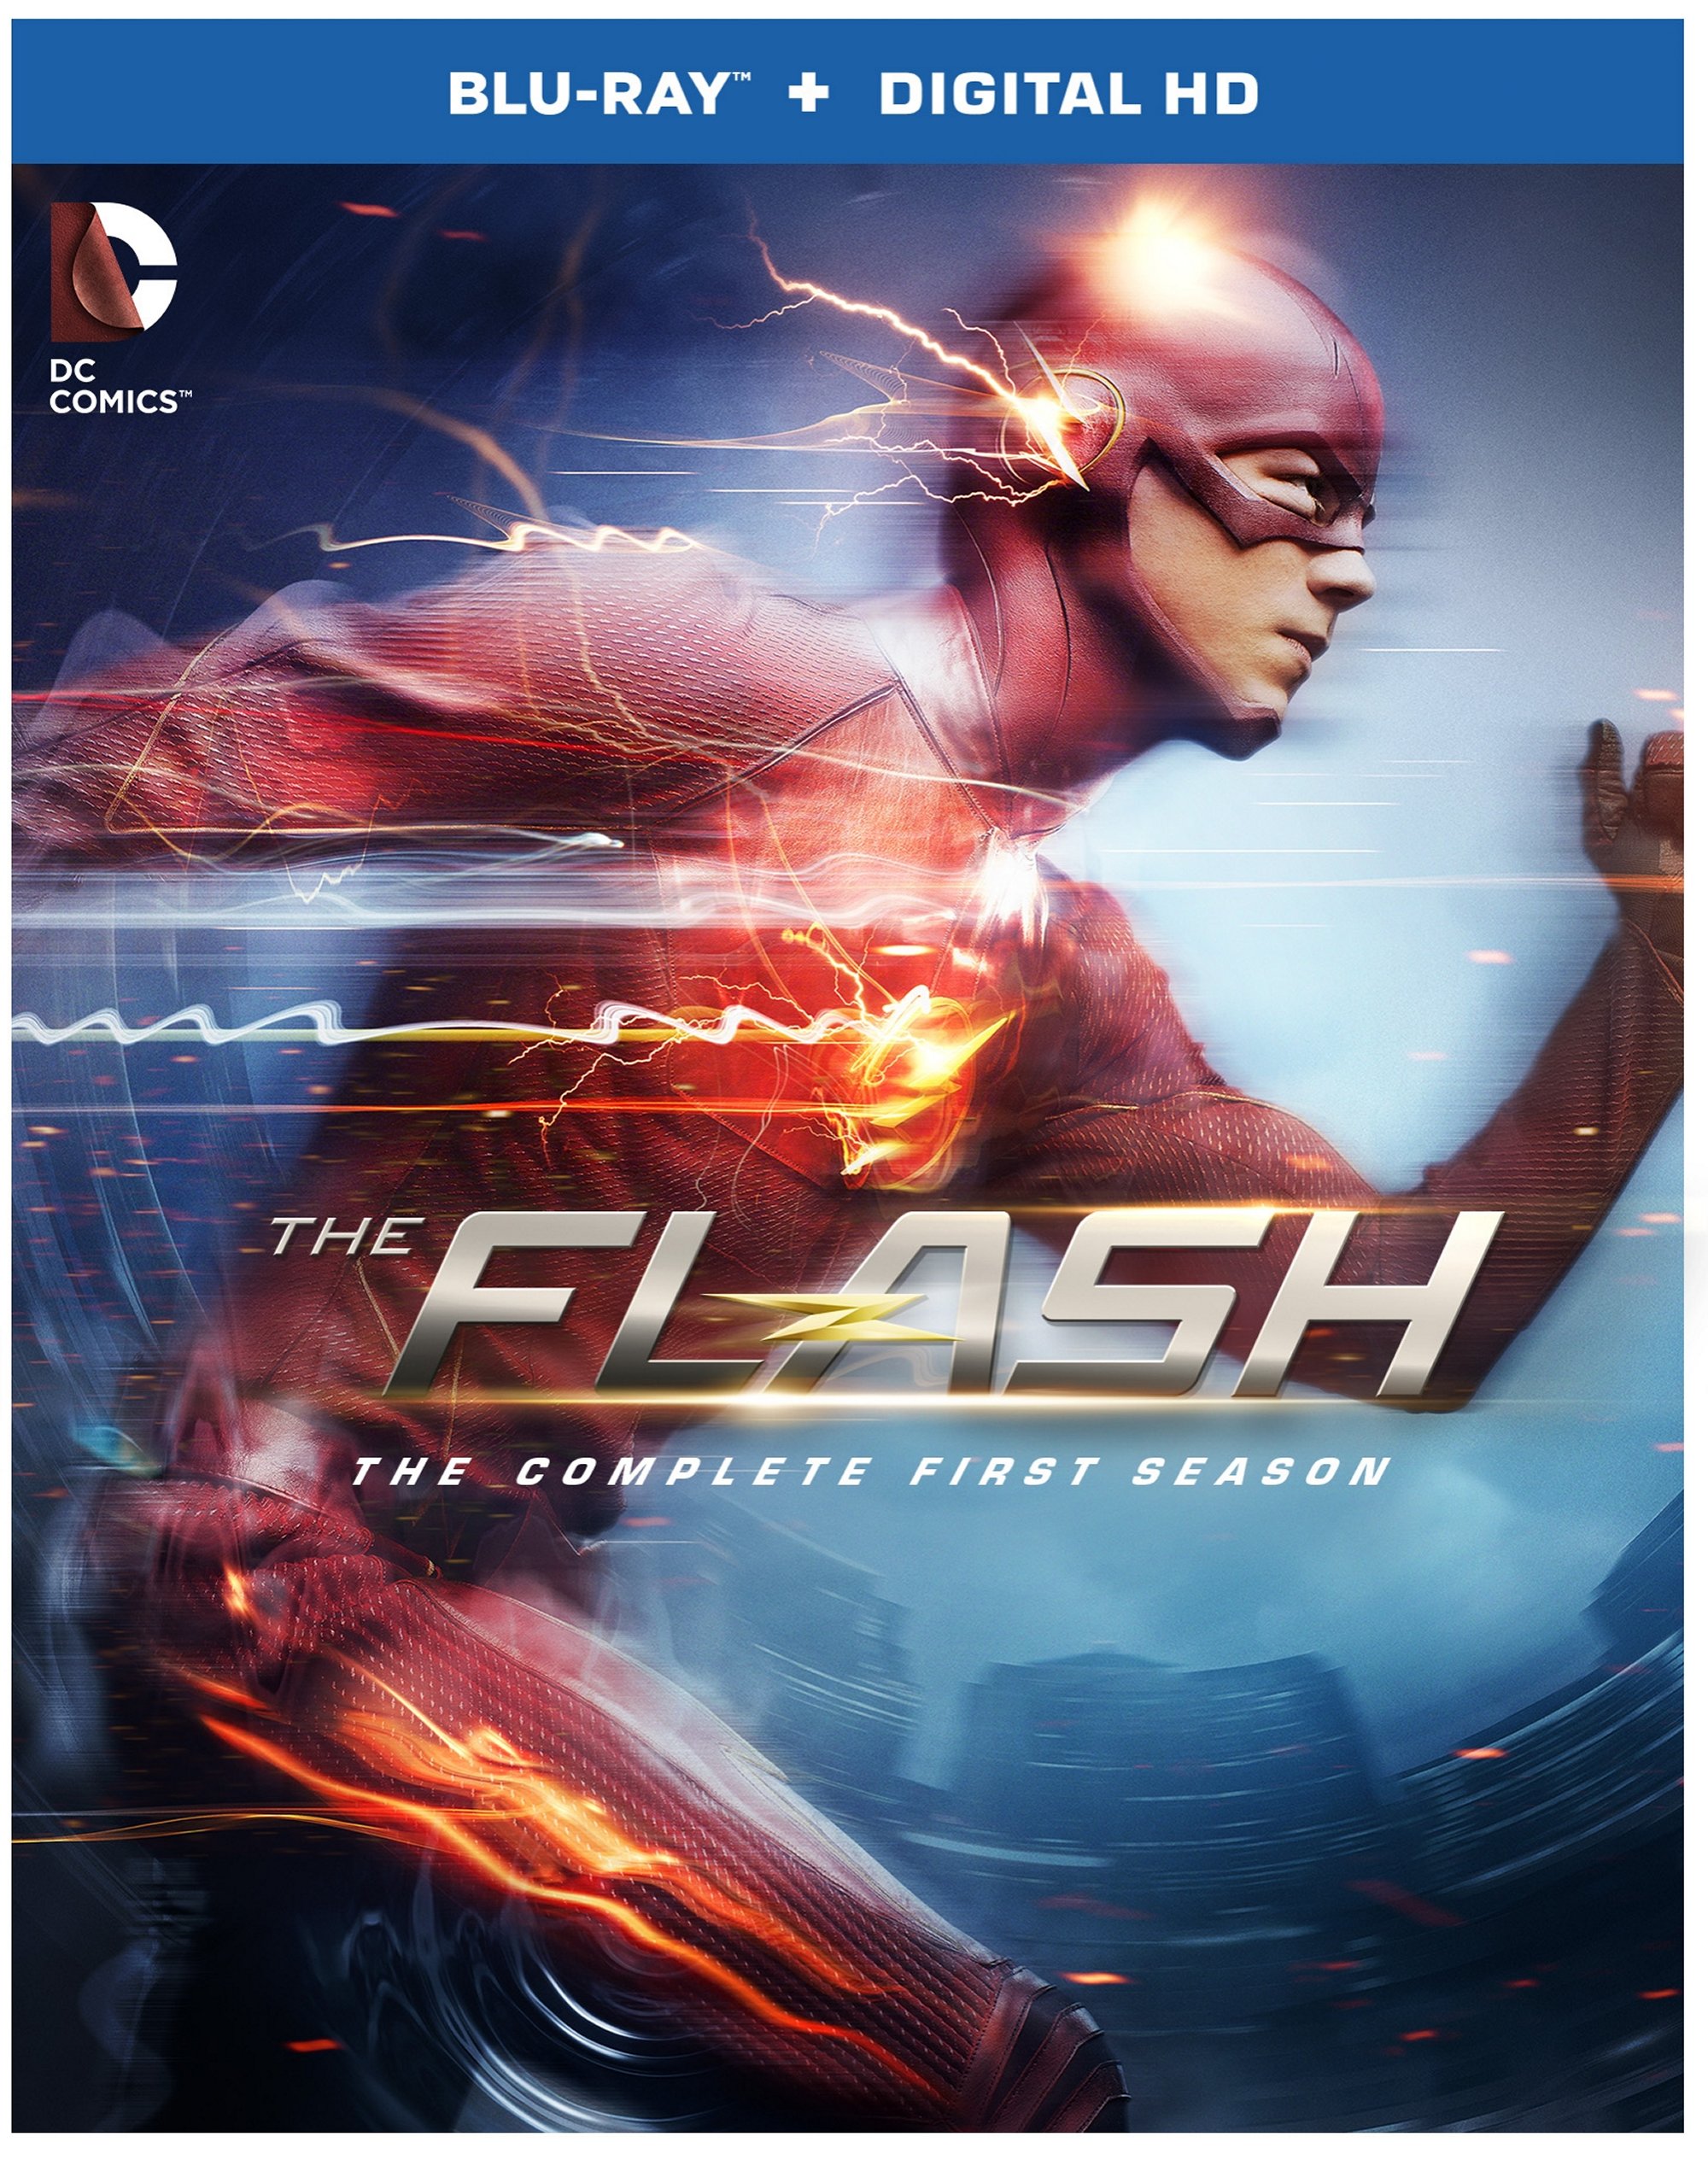 Own THE FLASH: THE NINTH AND FINAL SEASON On Blu-ray August 29th! at Why So  Blu?